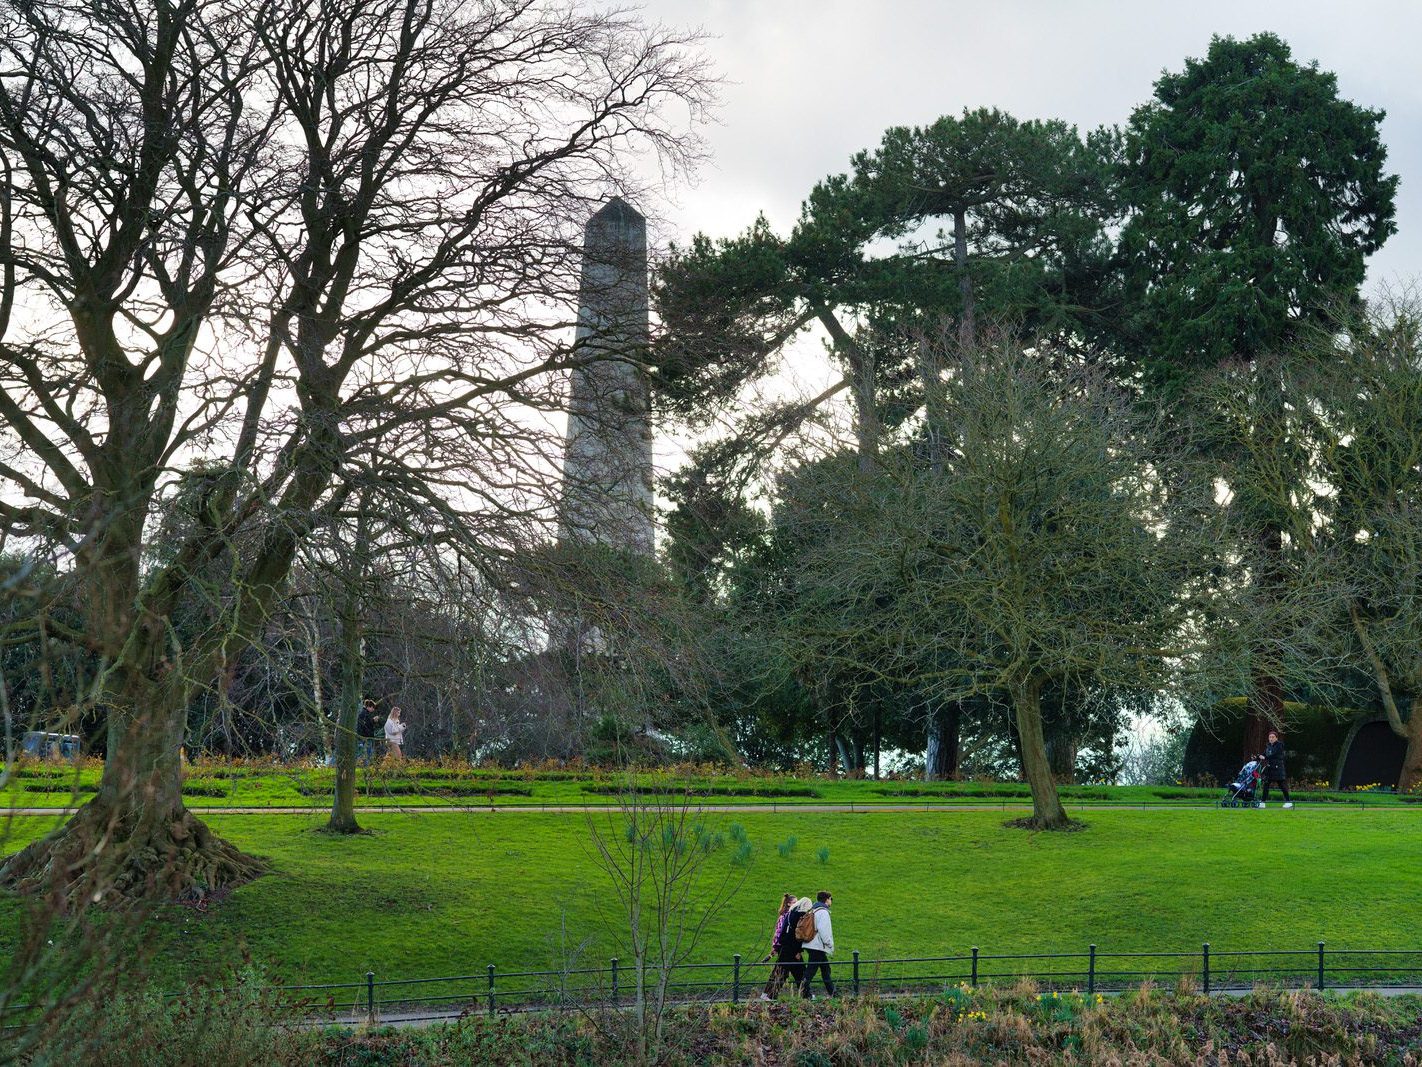 THE PEOPLES FLOWER GARDENS IN PHOENIX PARK [I USED AN 85MM LENS]-228551-1